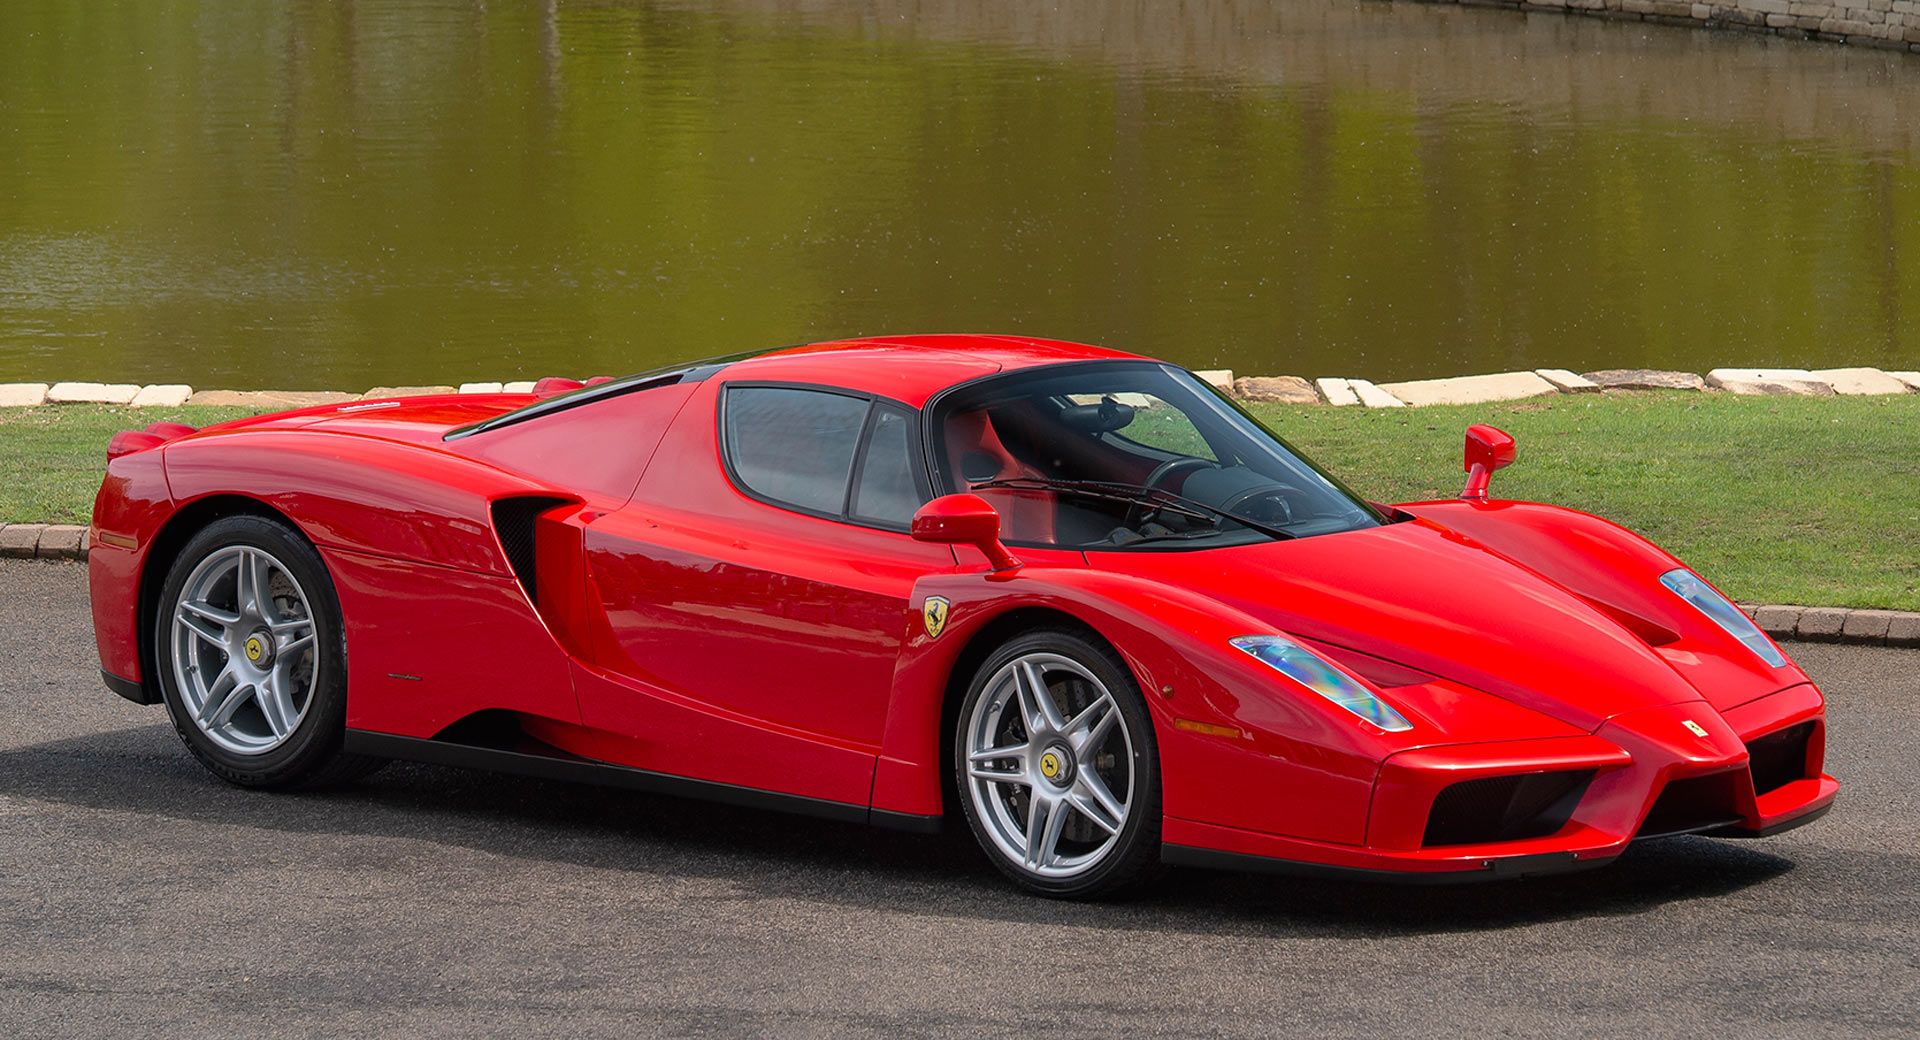 Here's Why The Ferrari Enzo Is The Hottest Supercar Of The Early 2000s